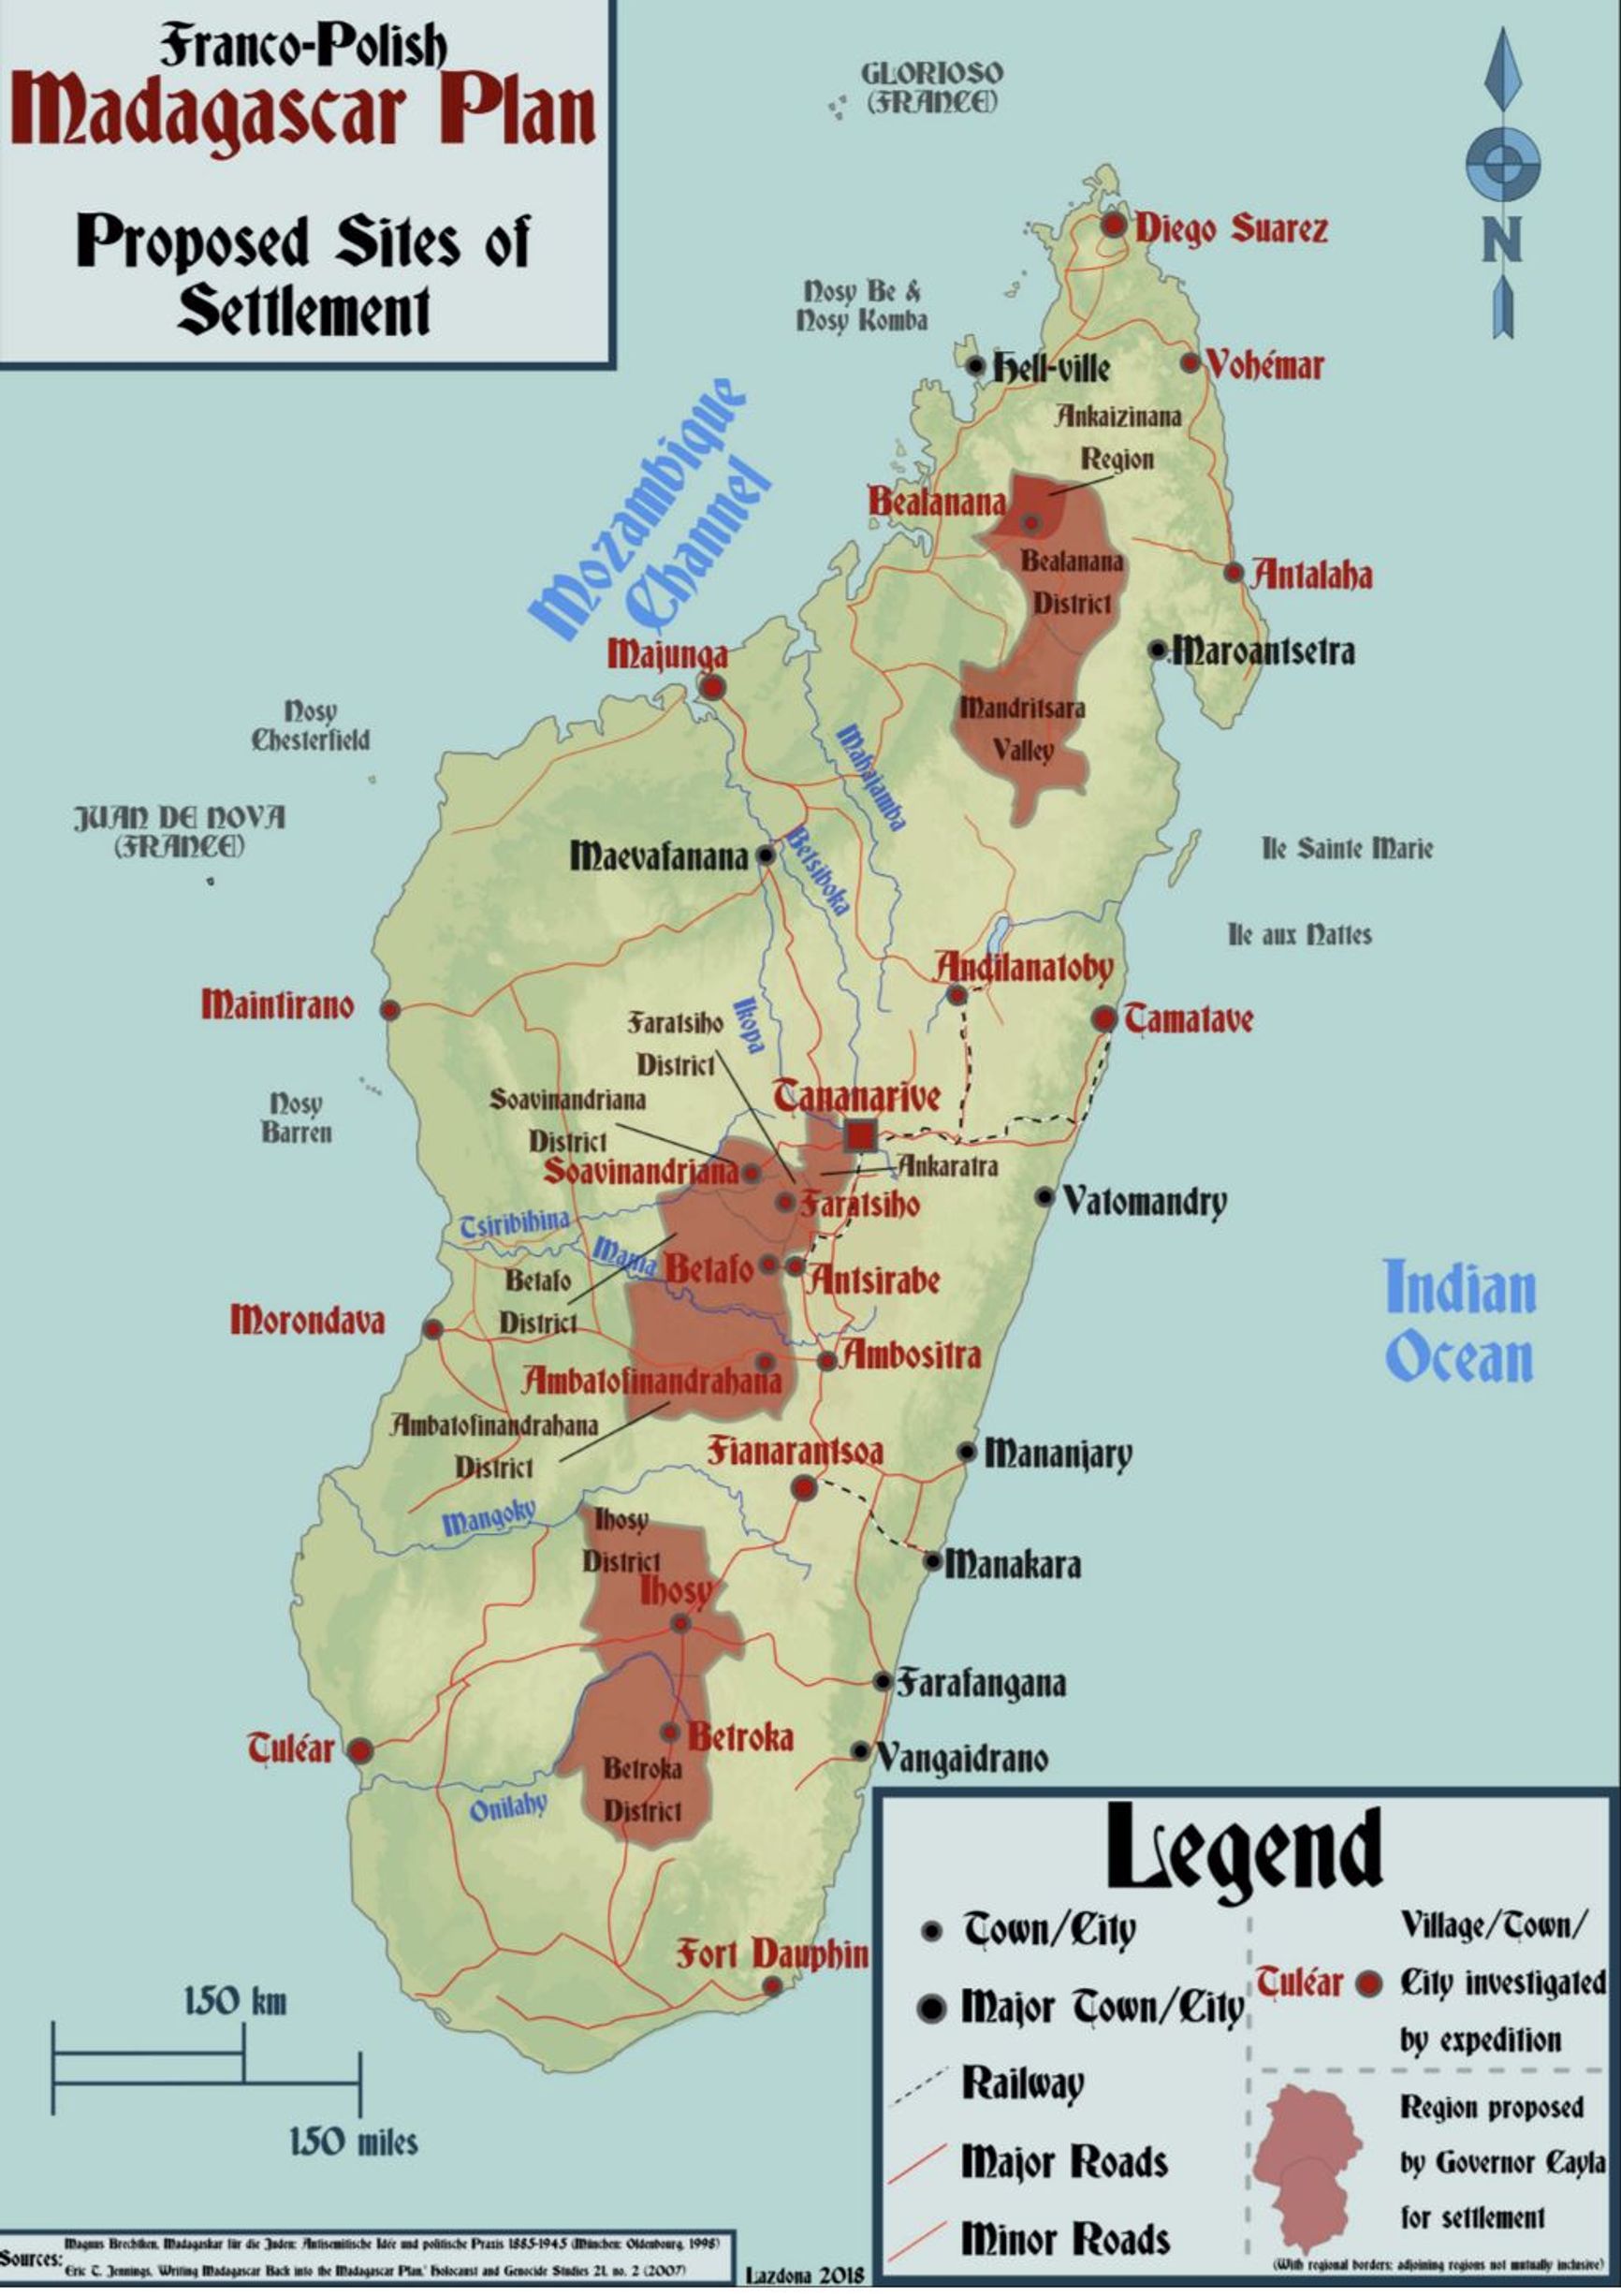 The proposed areas for the resettlement of Jews in Madagascar, according to the Franco-Polish version of the 1937 plan